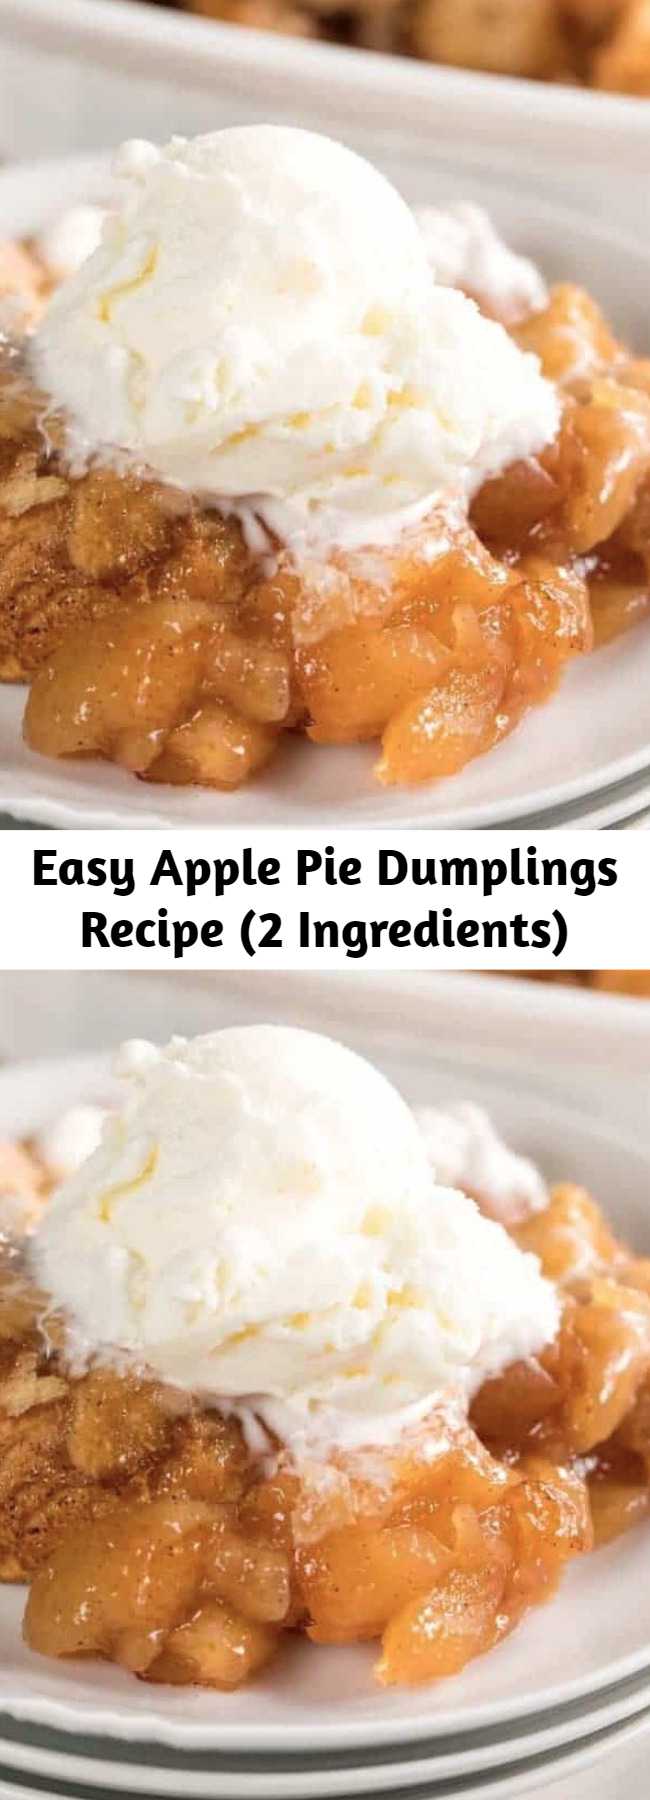 Easy Apple Pie Dumplings Recipe (2 Ingredients) - Apple Pie Dumplings made with just two easy ingredients! Simply add them to a baking dish and cook until tender and lightly browned. Serve these dumplings warm out of the oven with a big scoop of vanilla ice cream or a drizzle of heavy cream.